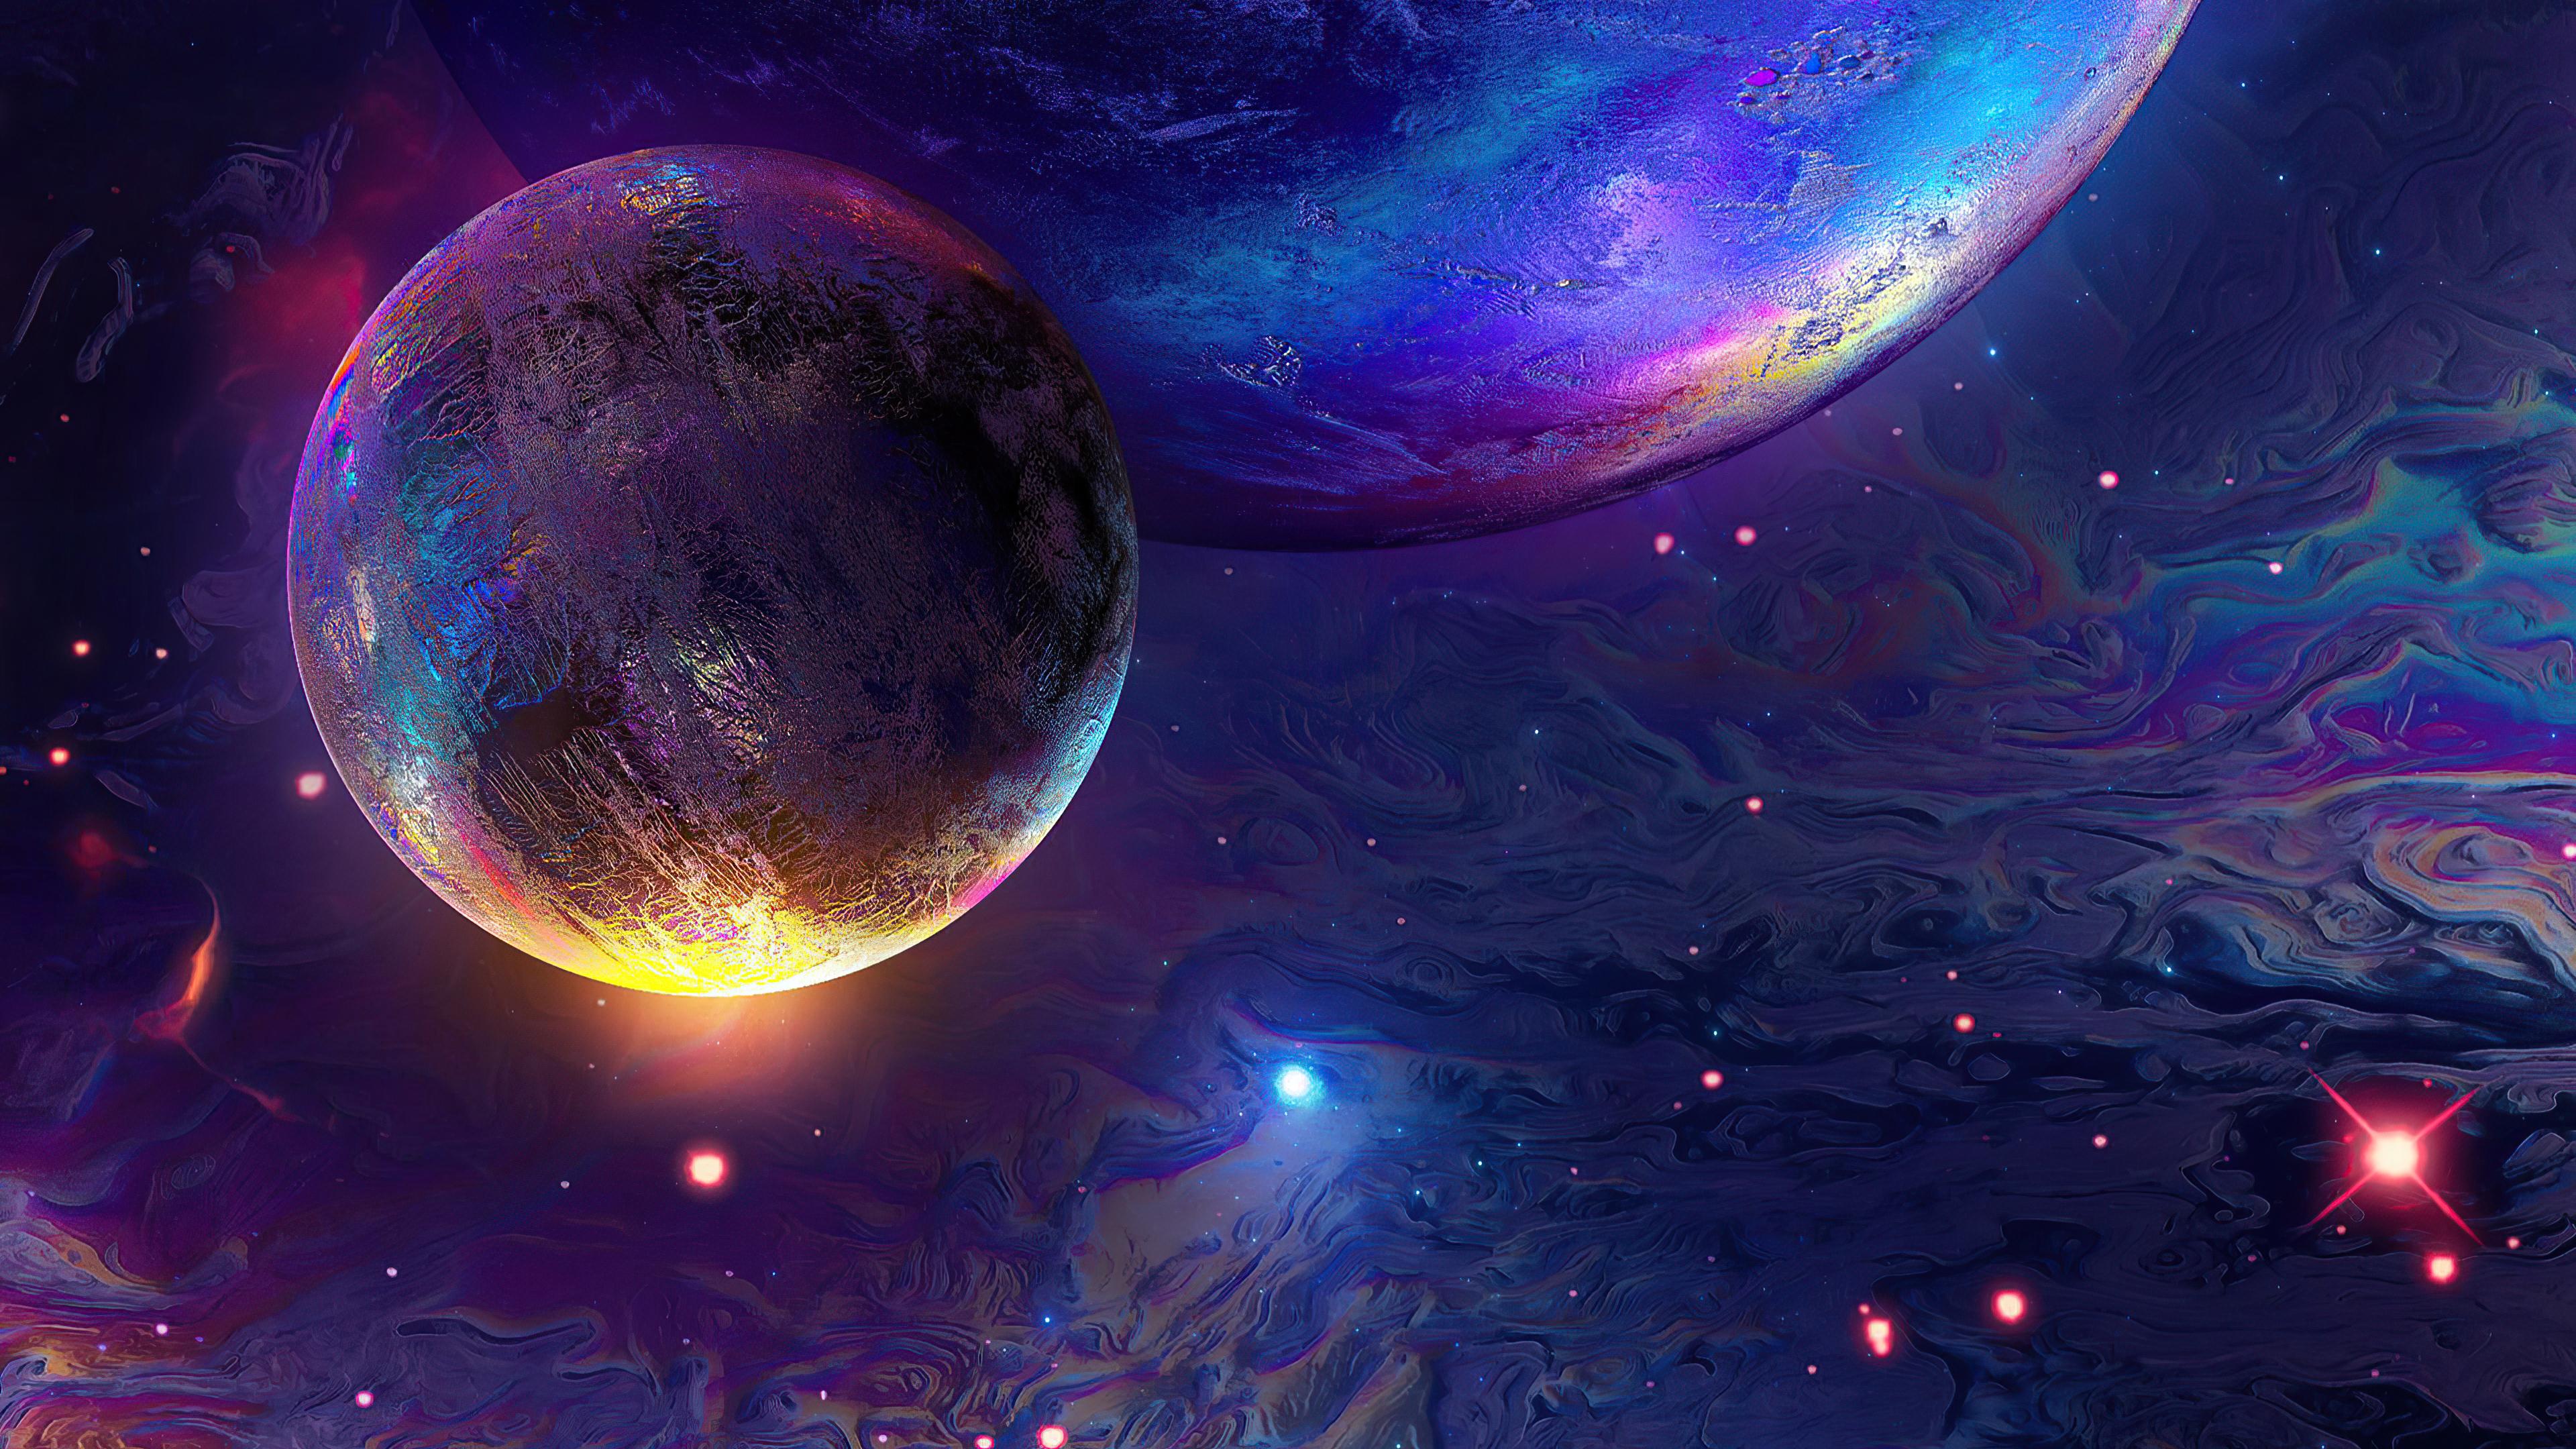 3840 x 2160 · jpeg - Outer Digital Space, HD Digital Universe, 4k Wallpapers, Images ...